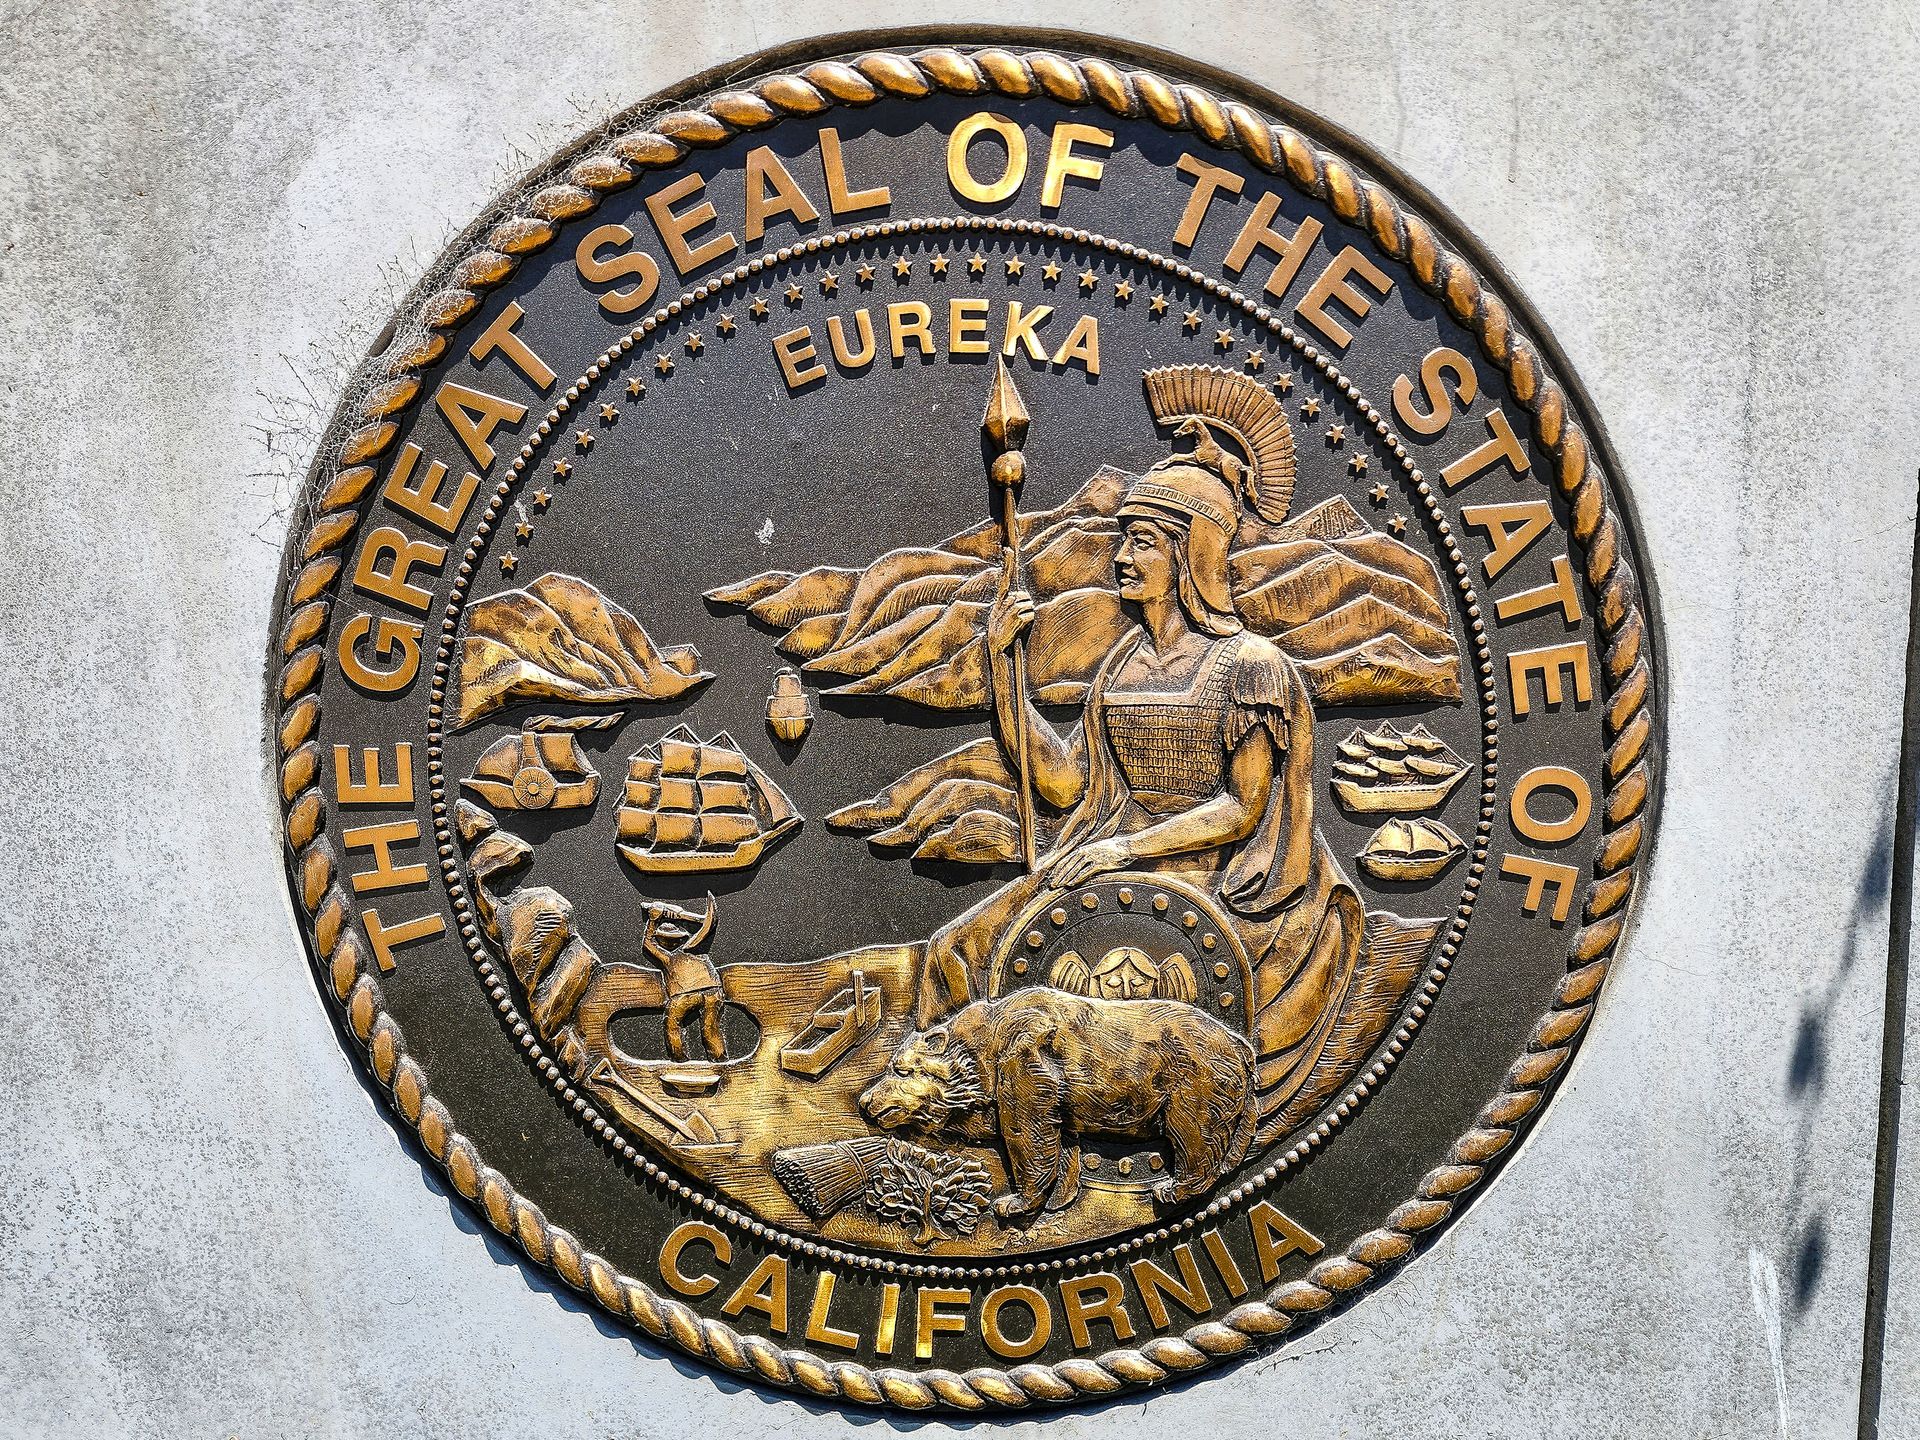 the great seal of the state of California